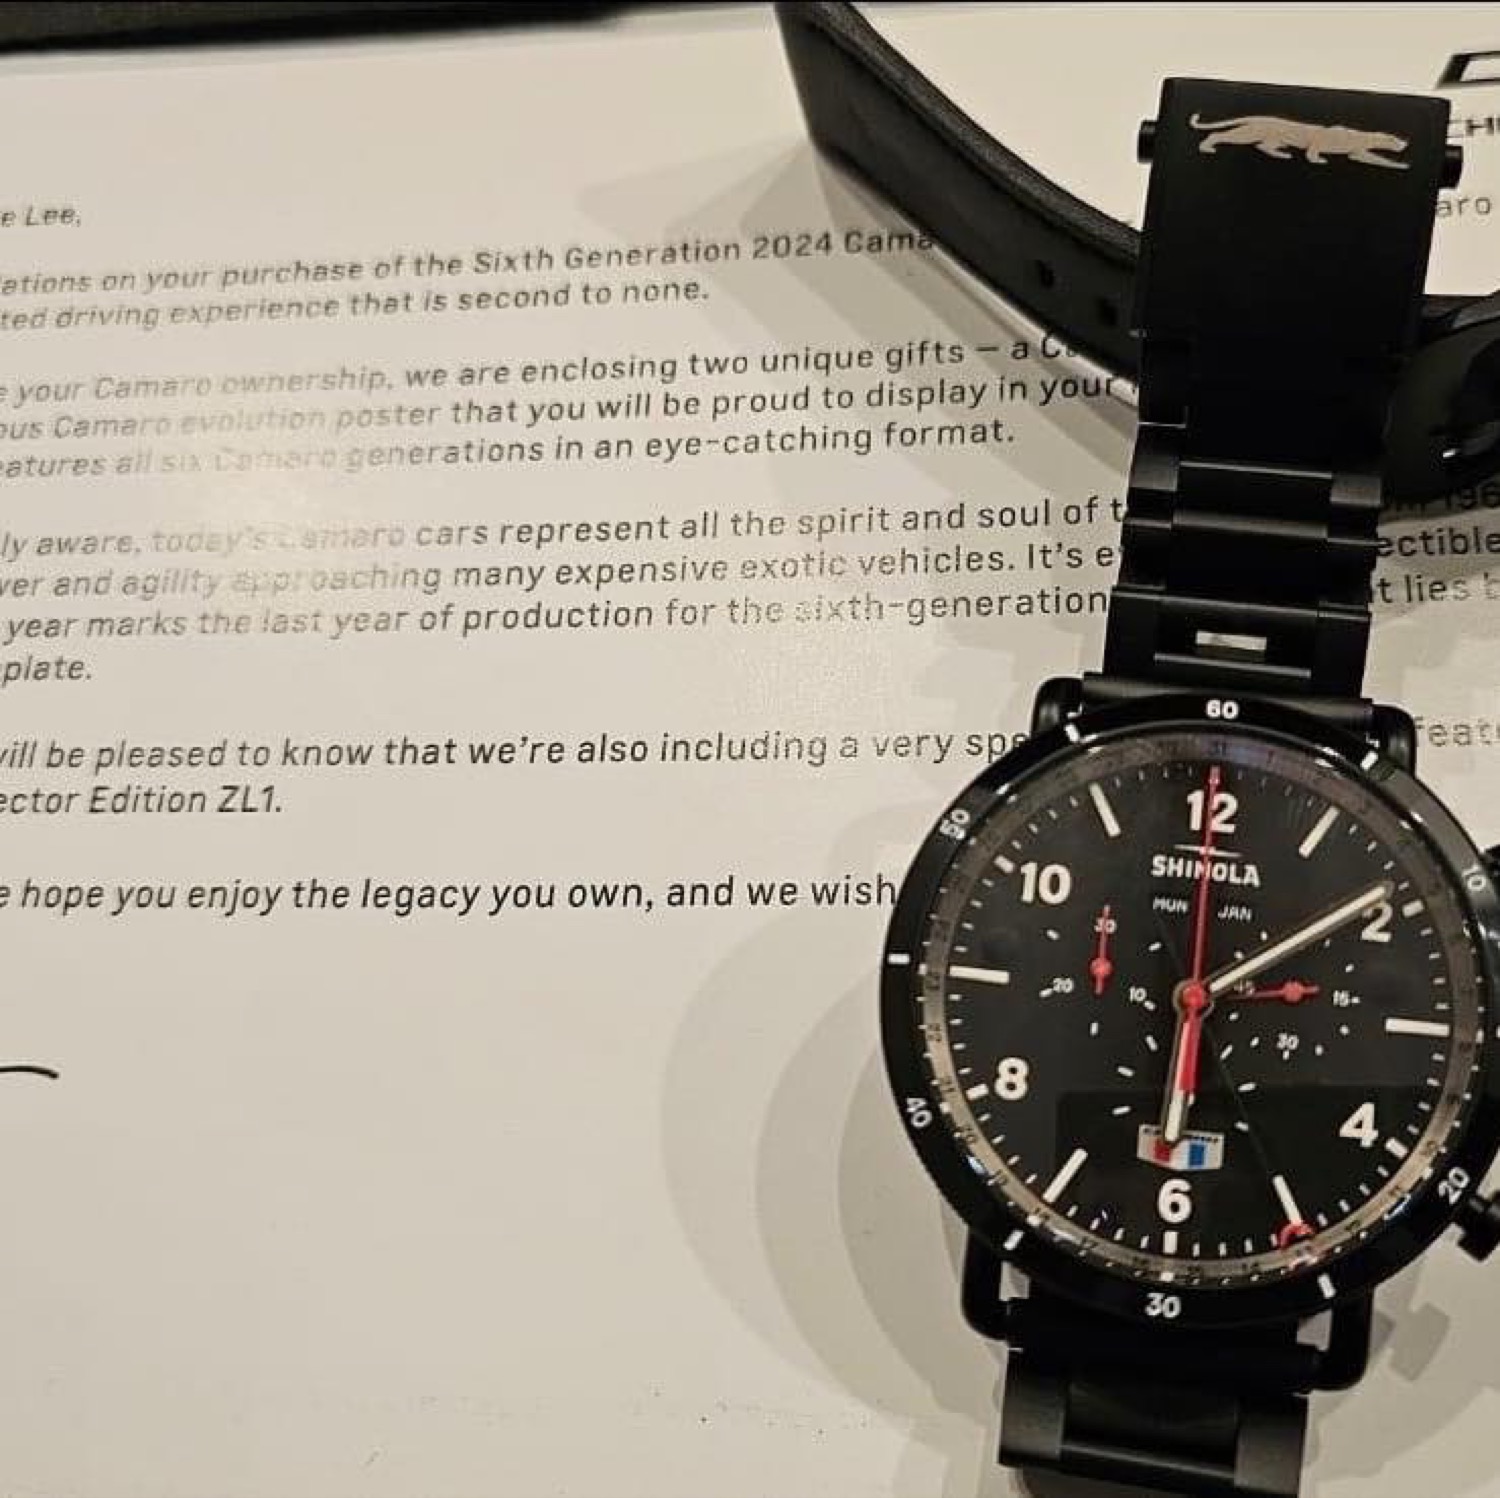 Heuer Camaro for $5,673 for sale from a Seller on Chrono24